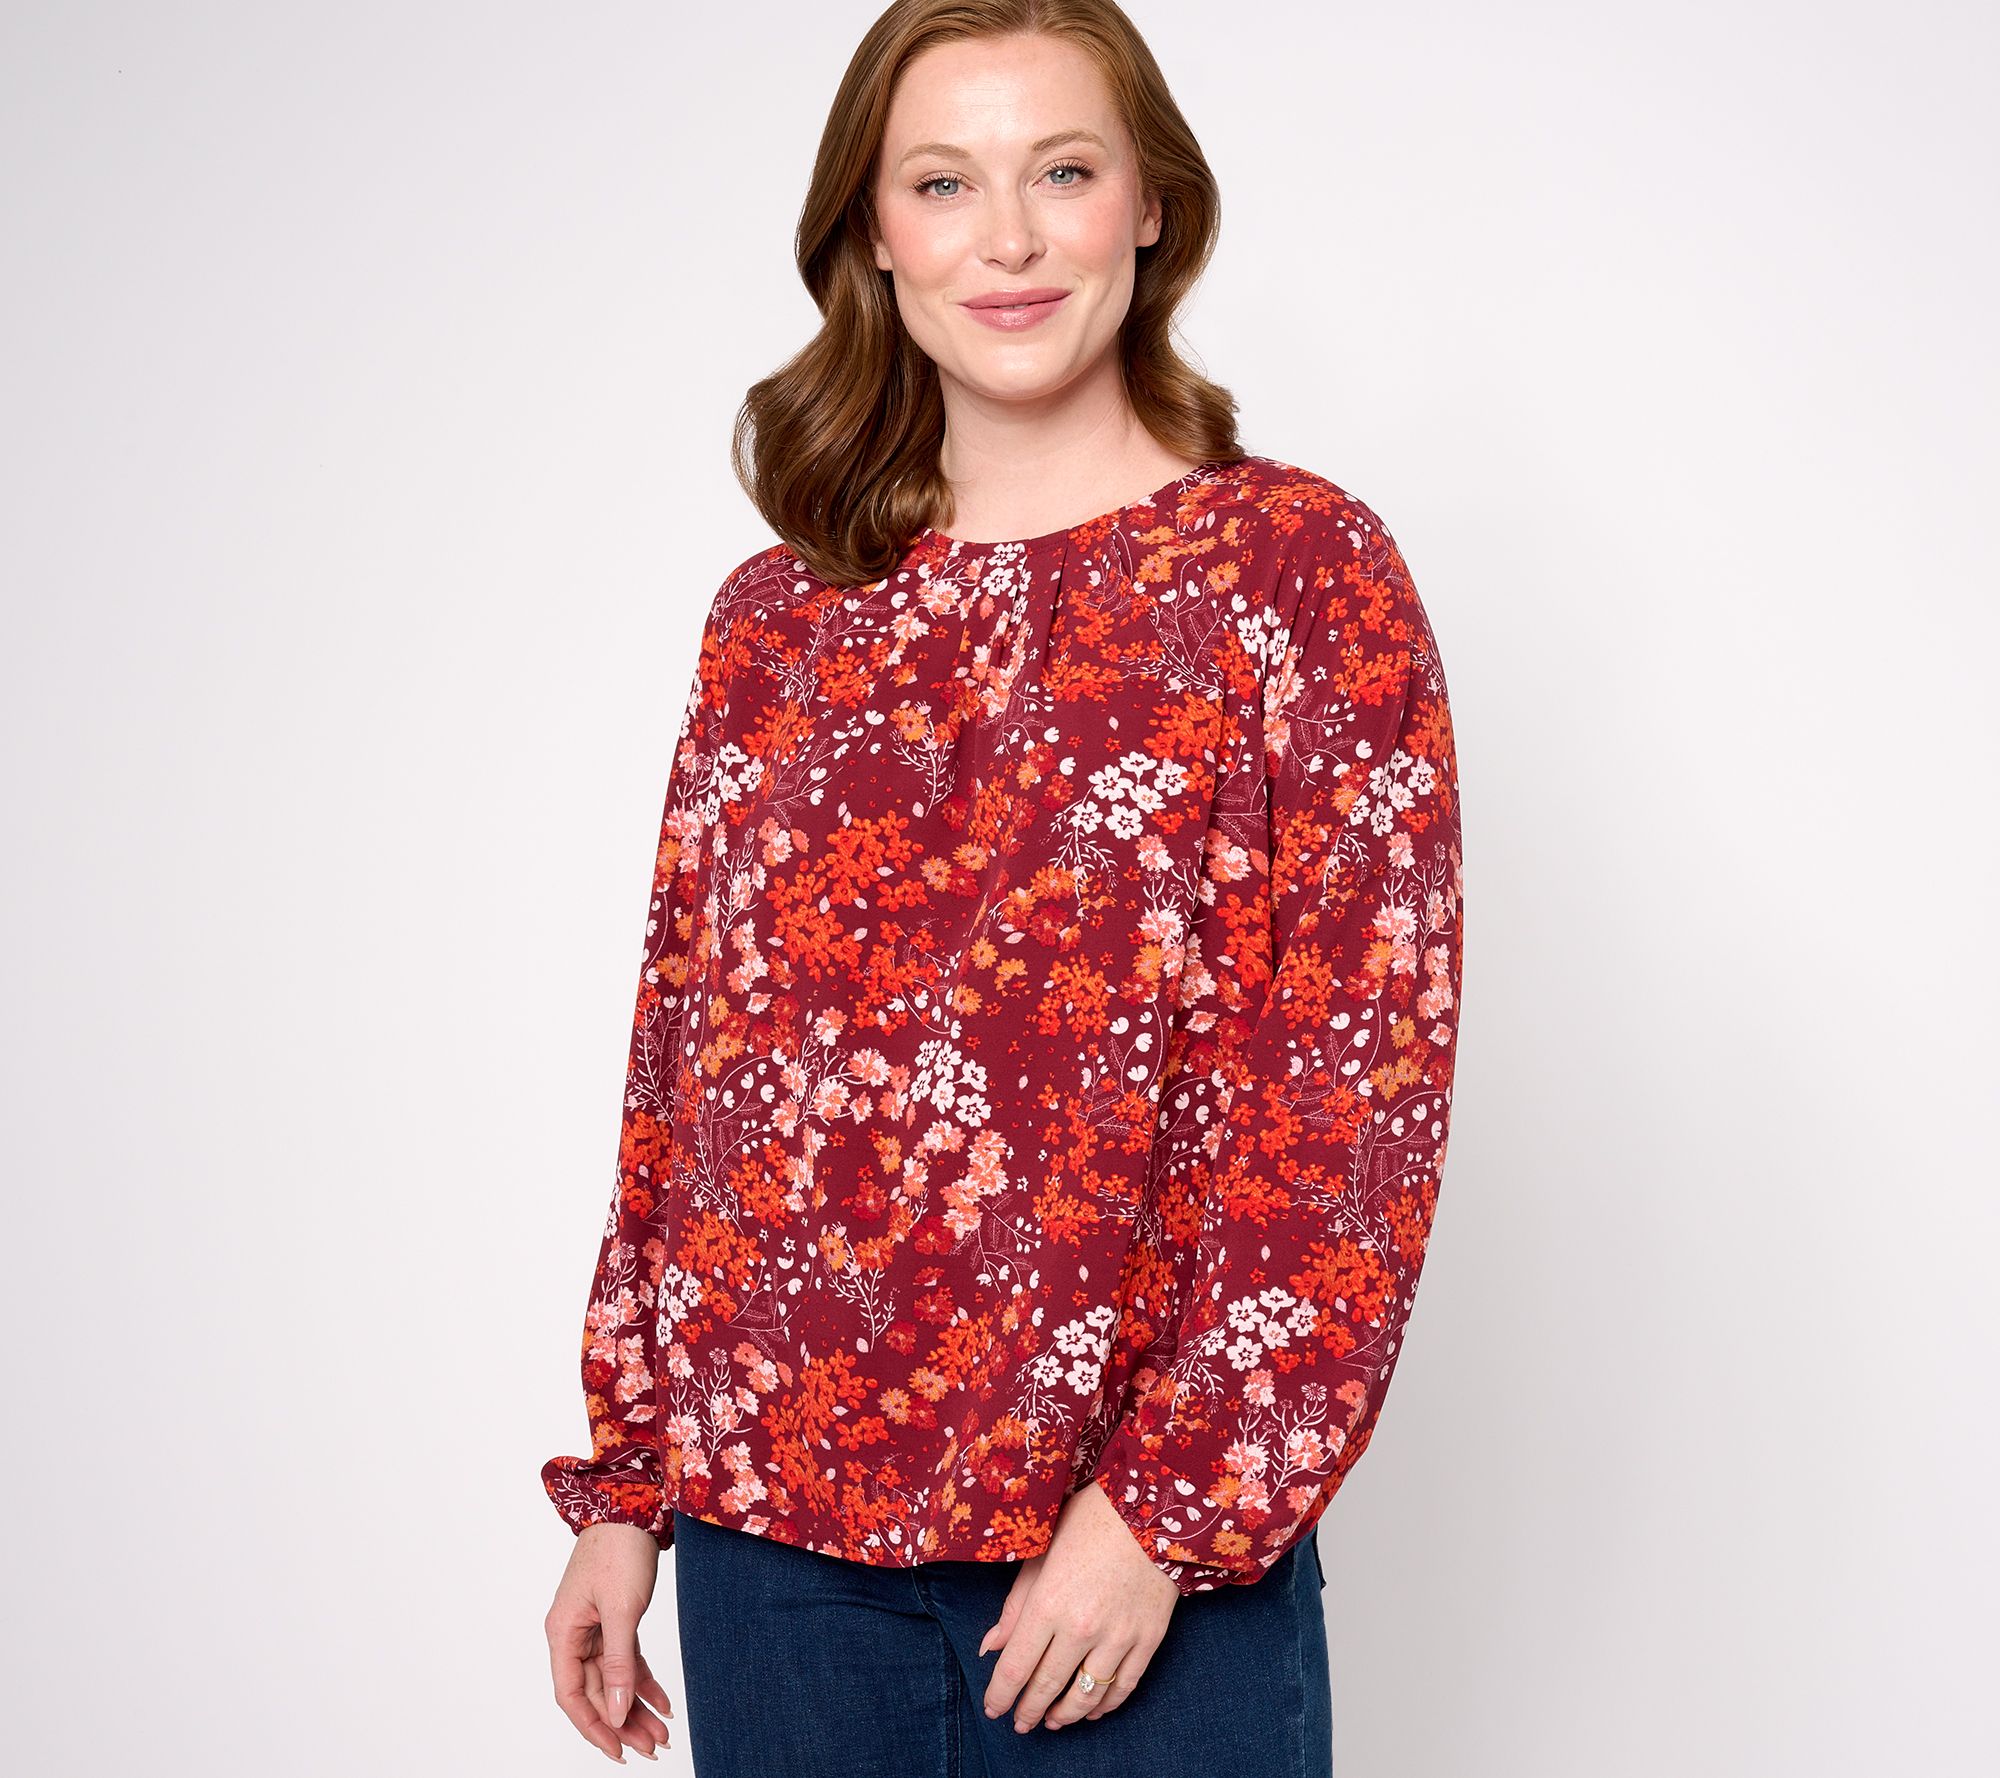 Denim & Co. Long Sleeve Printed Blouse with Pleat Detail - QVC.com